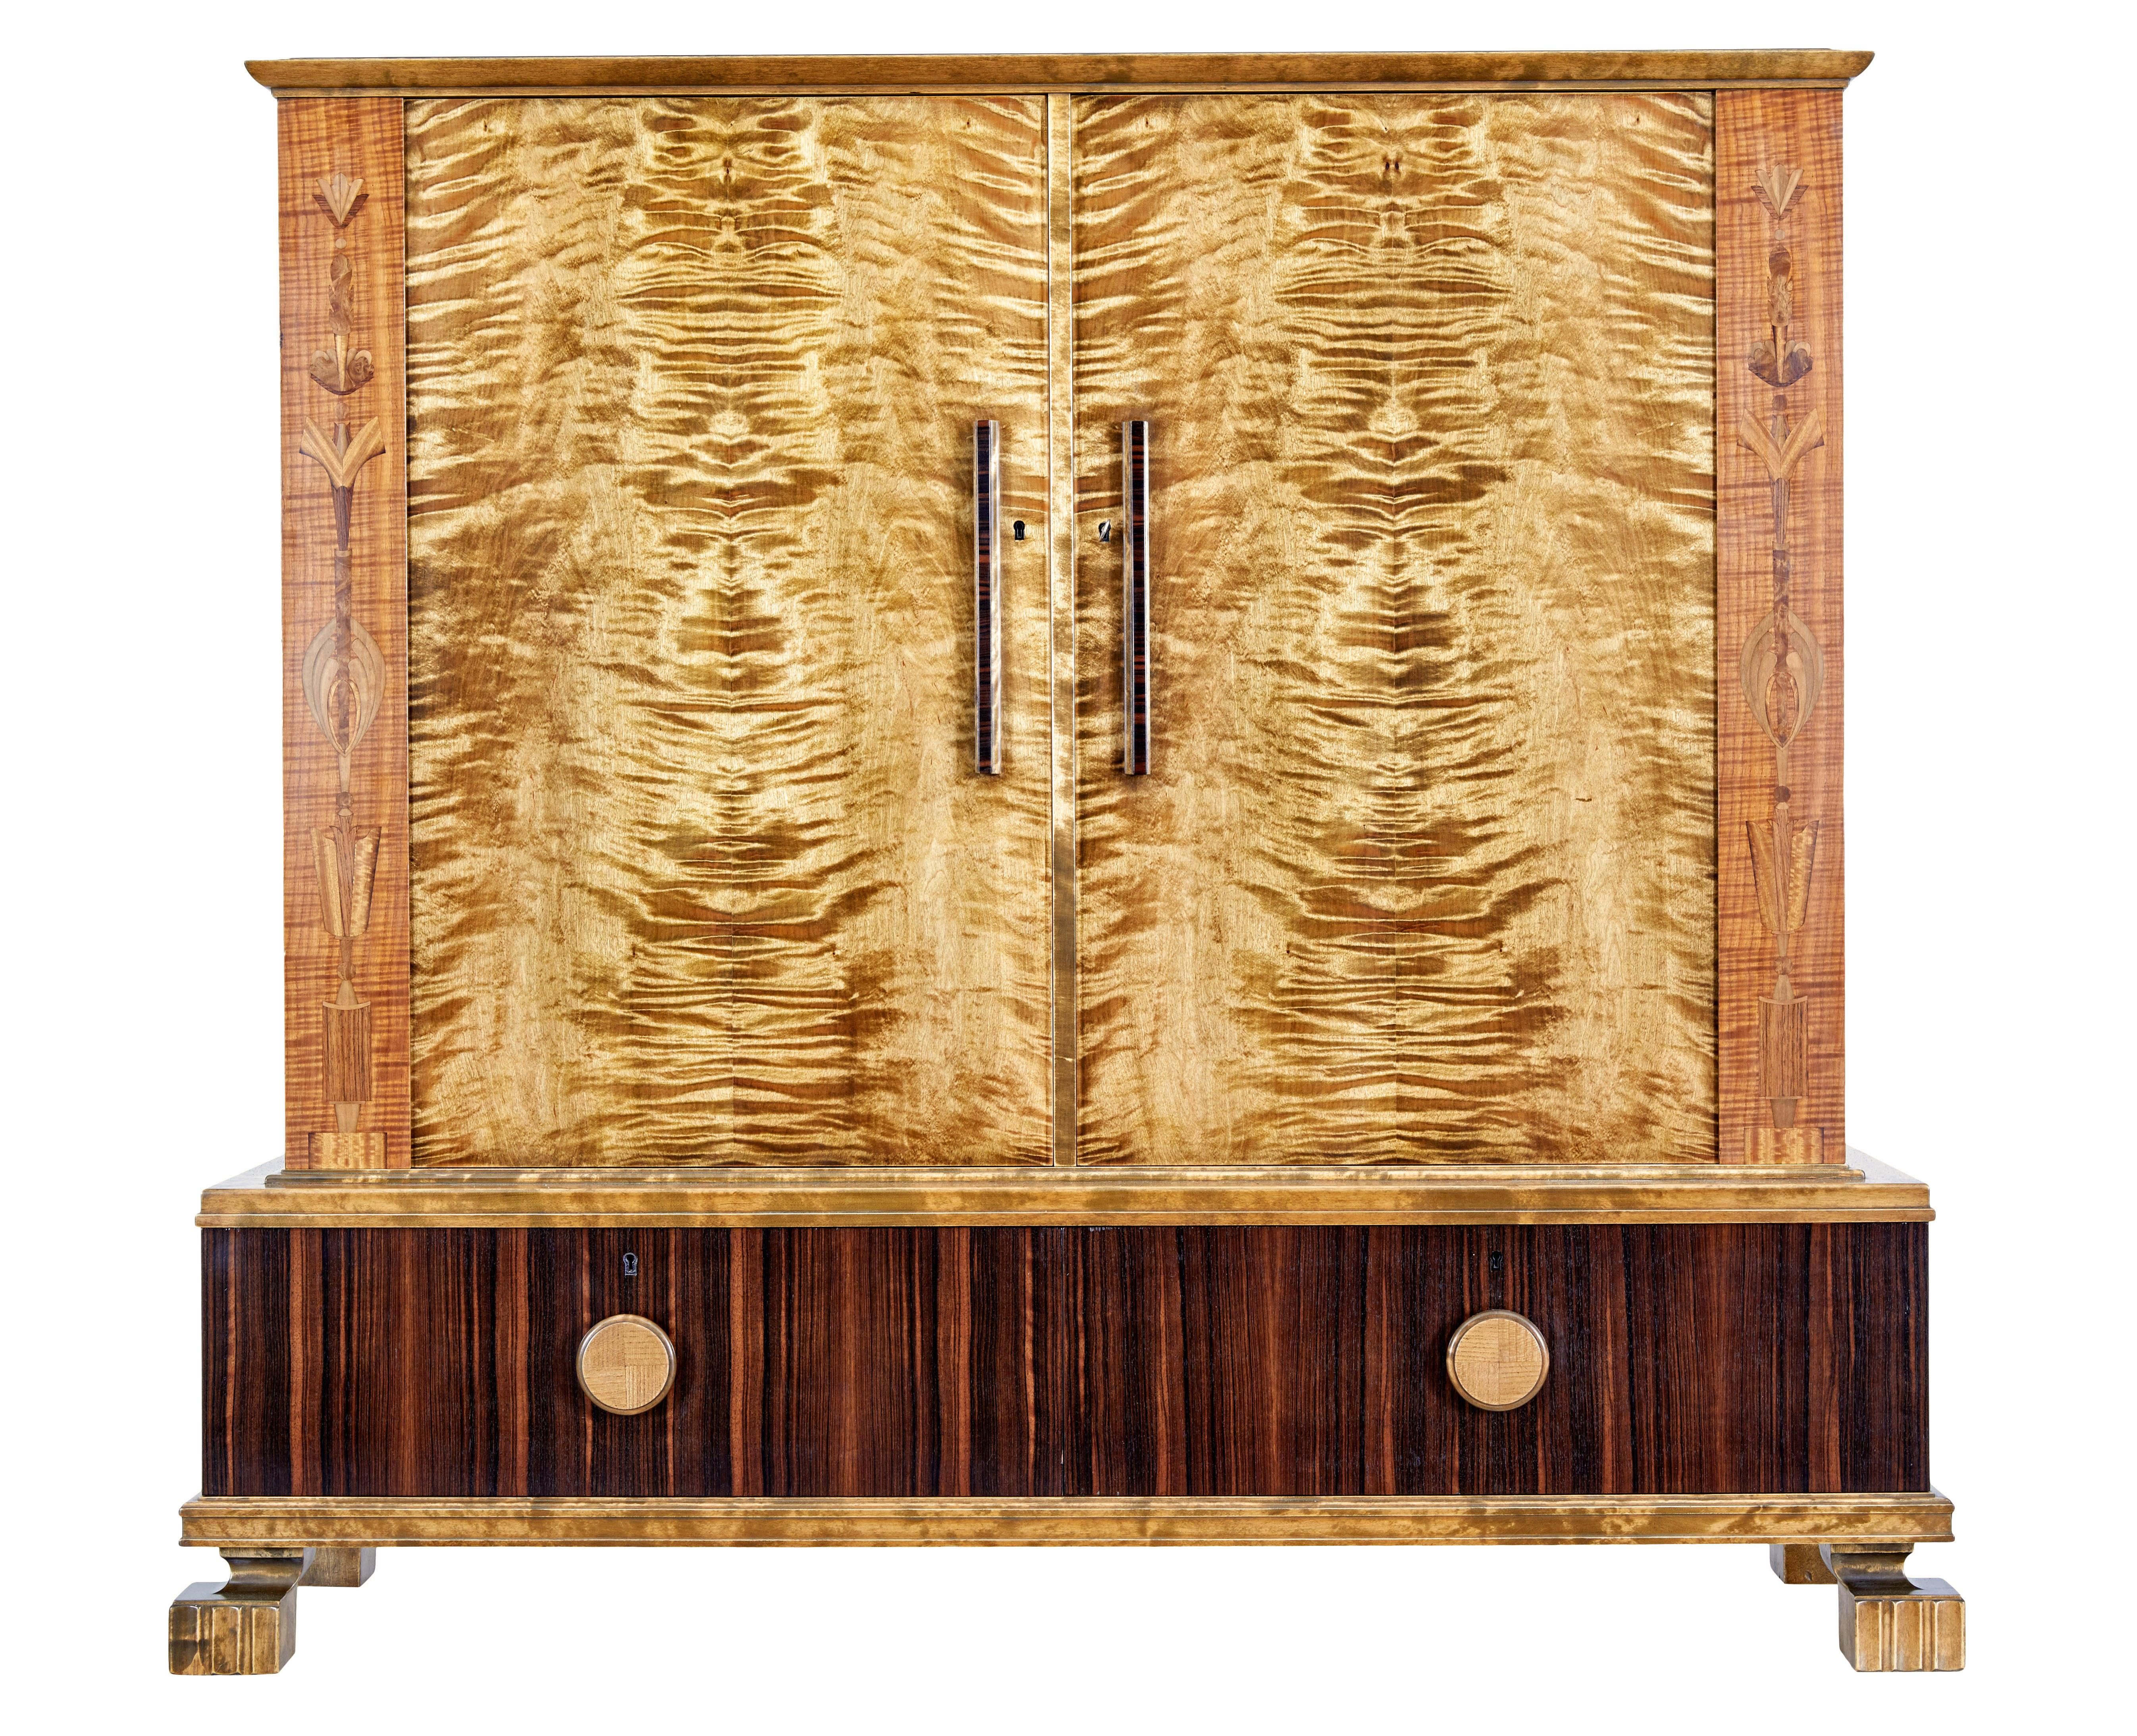 Swedish art deco burr birch cupboard circa 1930.

We are pleased to offer this stunning cabinet/sideboard which we have just re-finished in our workshop.

Beautifully presented in birch, mahogany and kingwood.  Slight over-sailing top stands above a